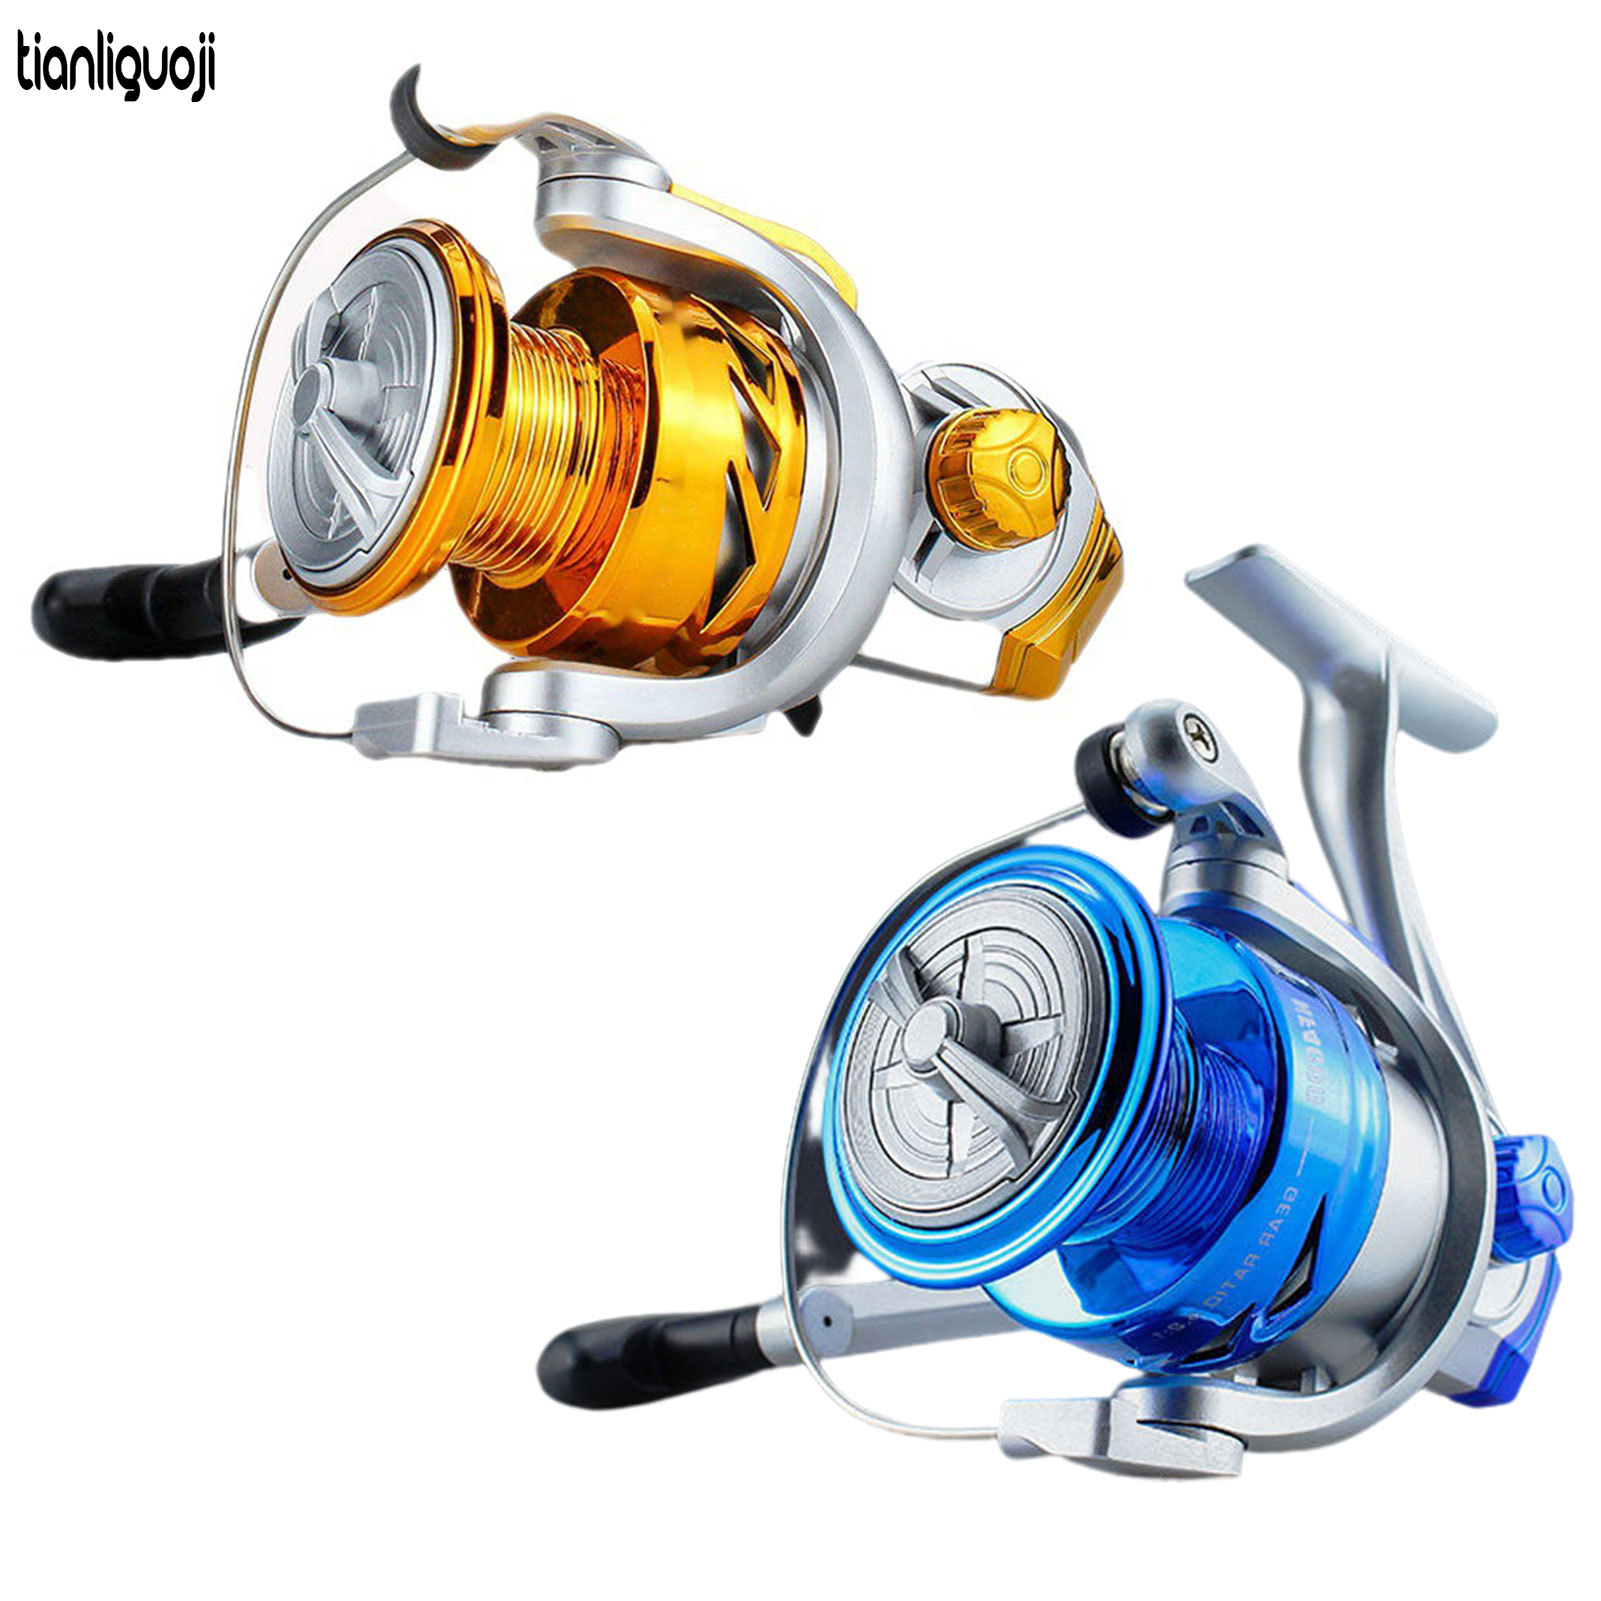 TG Fishing Reel Fishing Tackle Accessories Ergonomic Design Long-distance  Fishing Reel for Fishing Amateurs or Professionals TG-MY